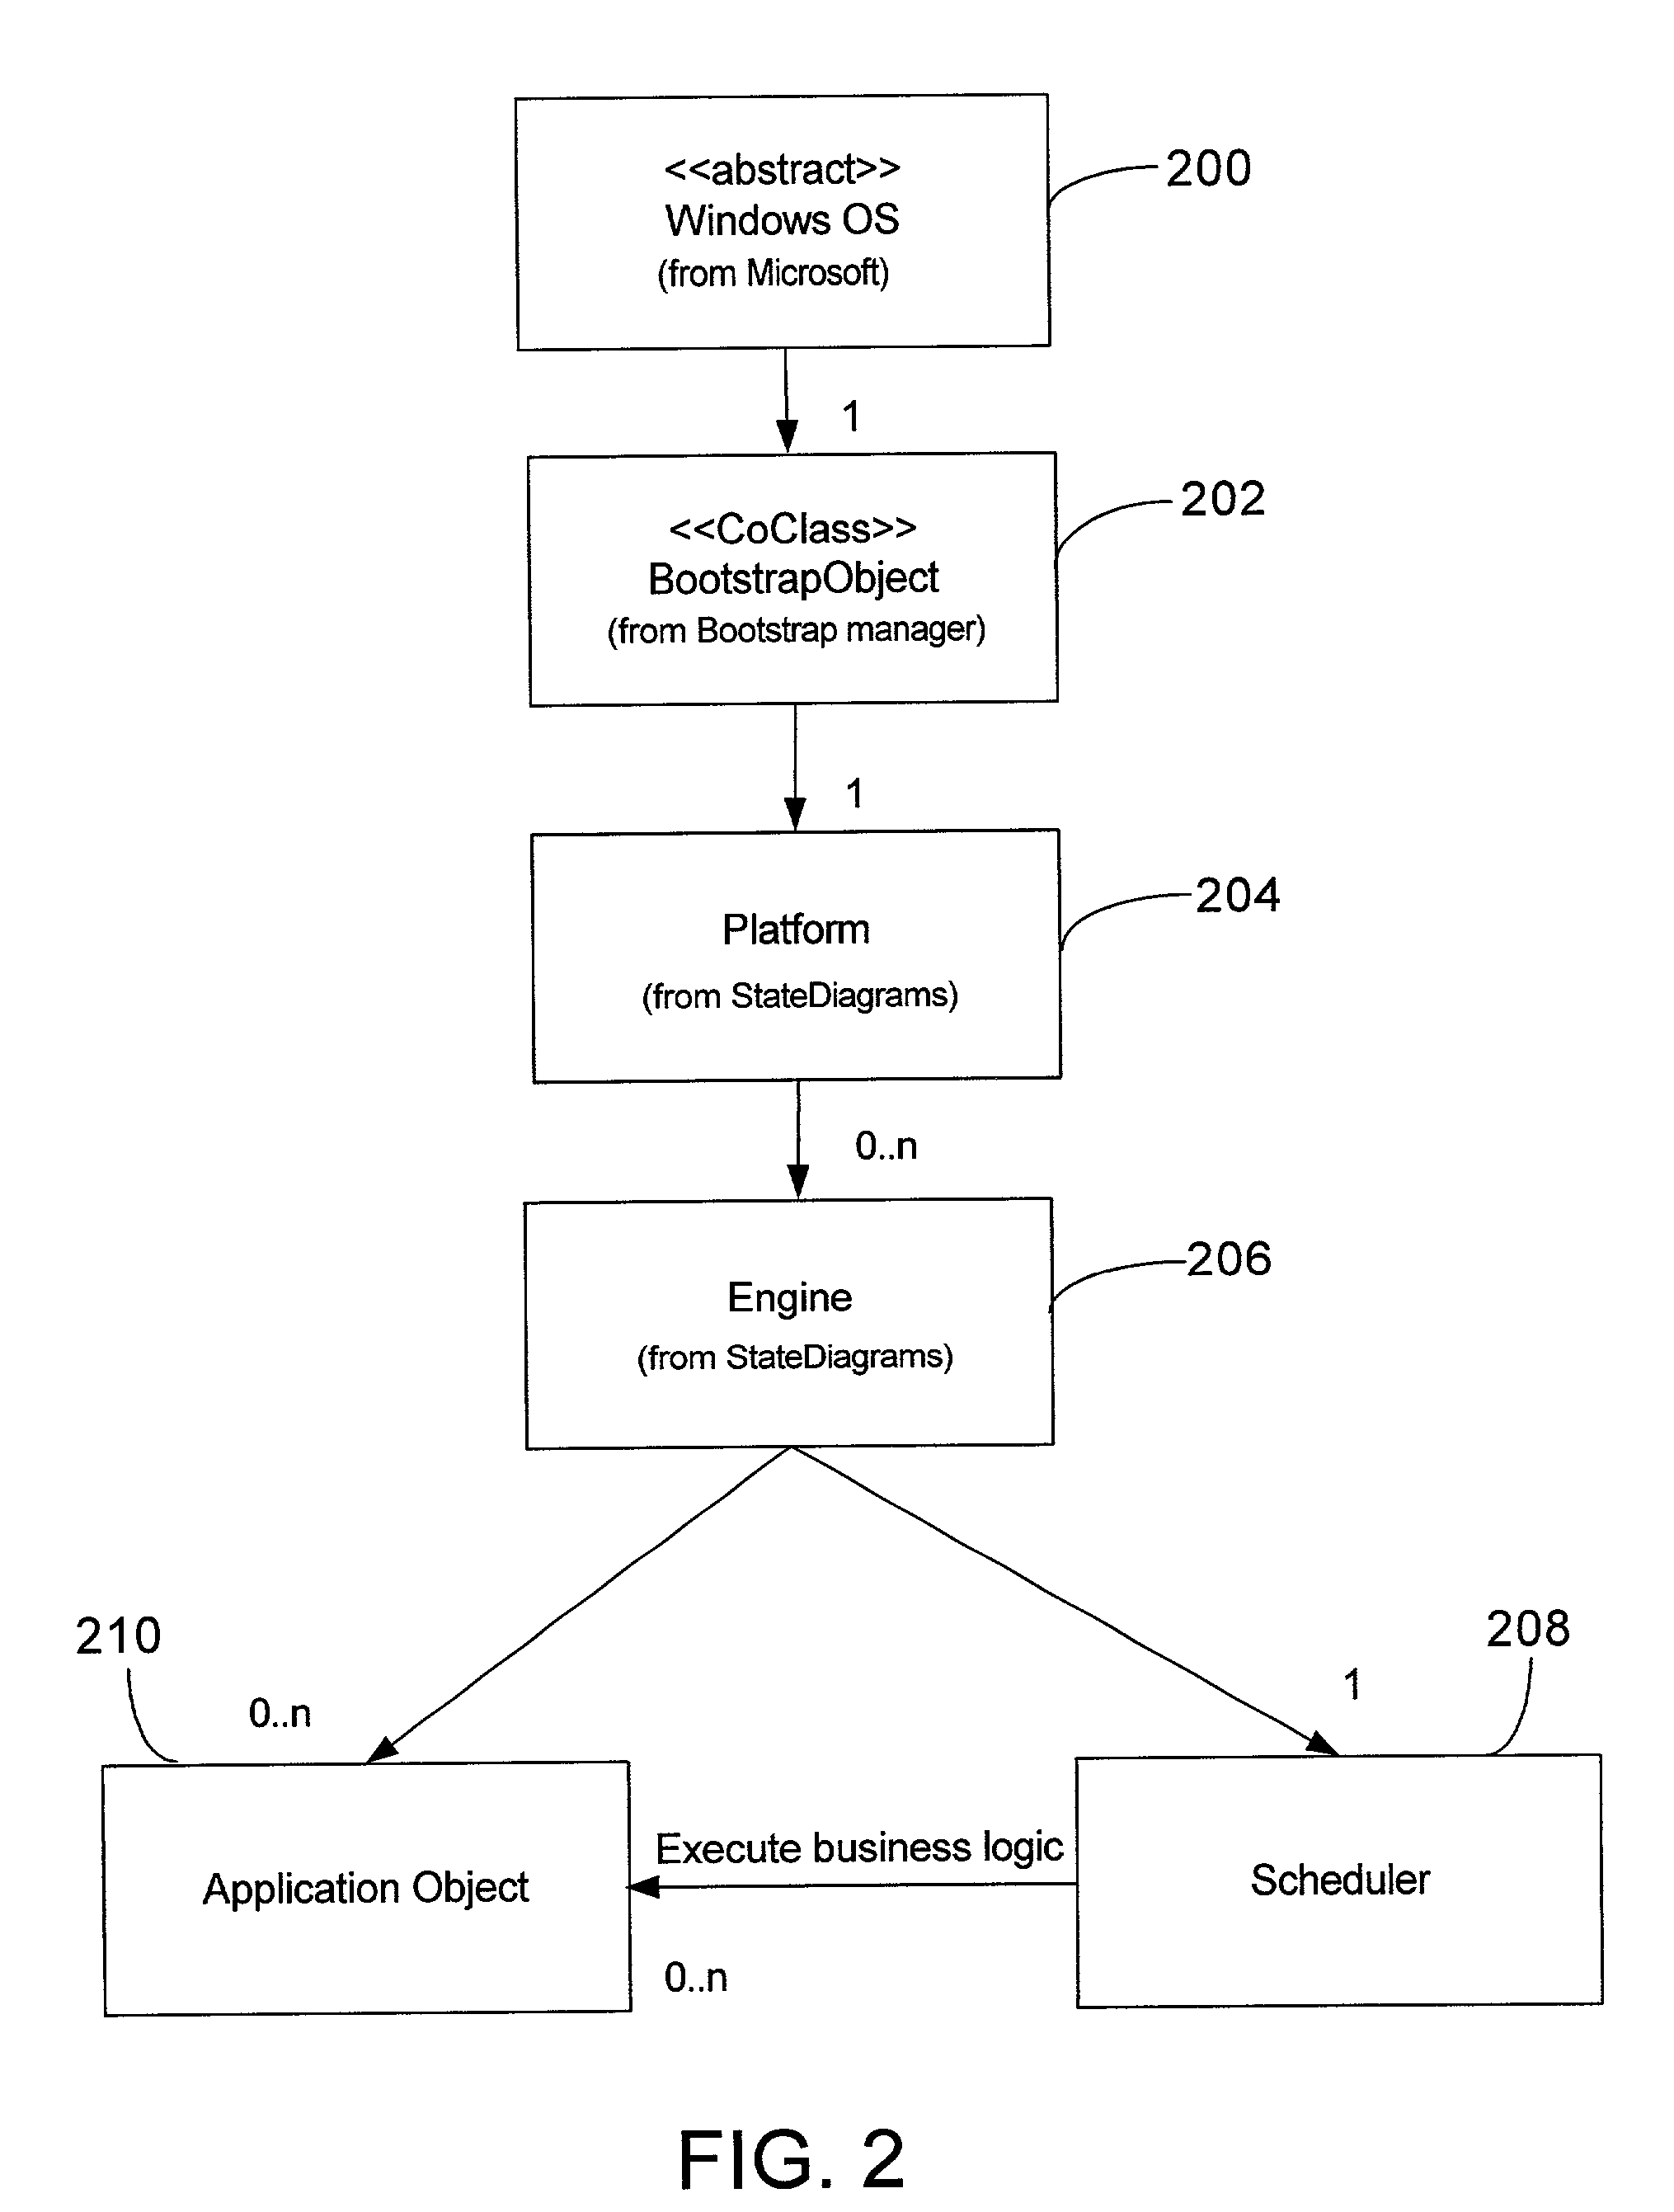 Supervisory process control and manufacturing information system application having a layered architecture